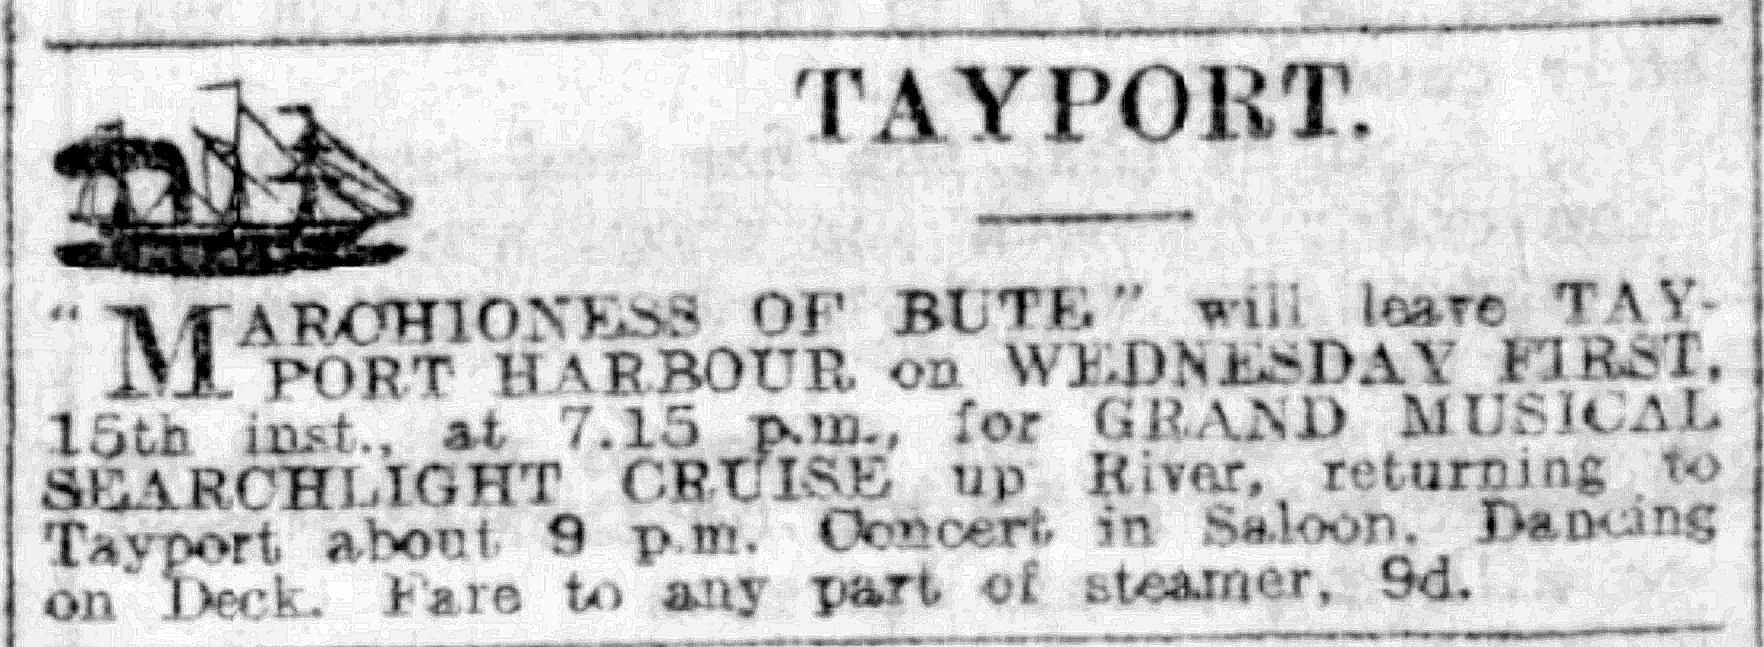 Tayport Heritage Trail - Board 3 - Musical Cruises advertised 1909 for Marchioness of Bute